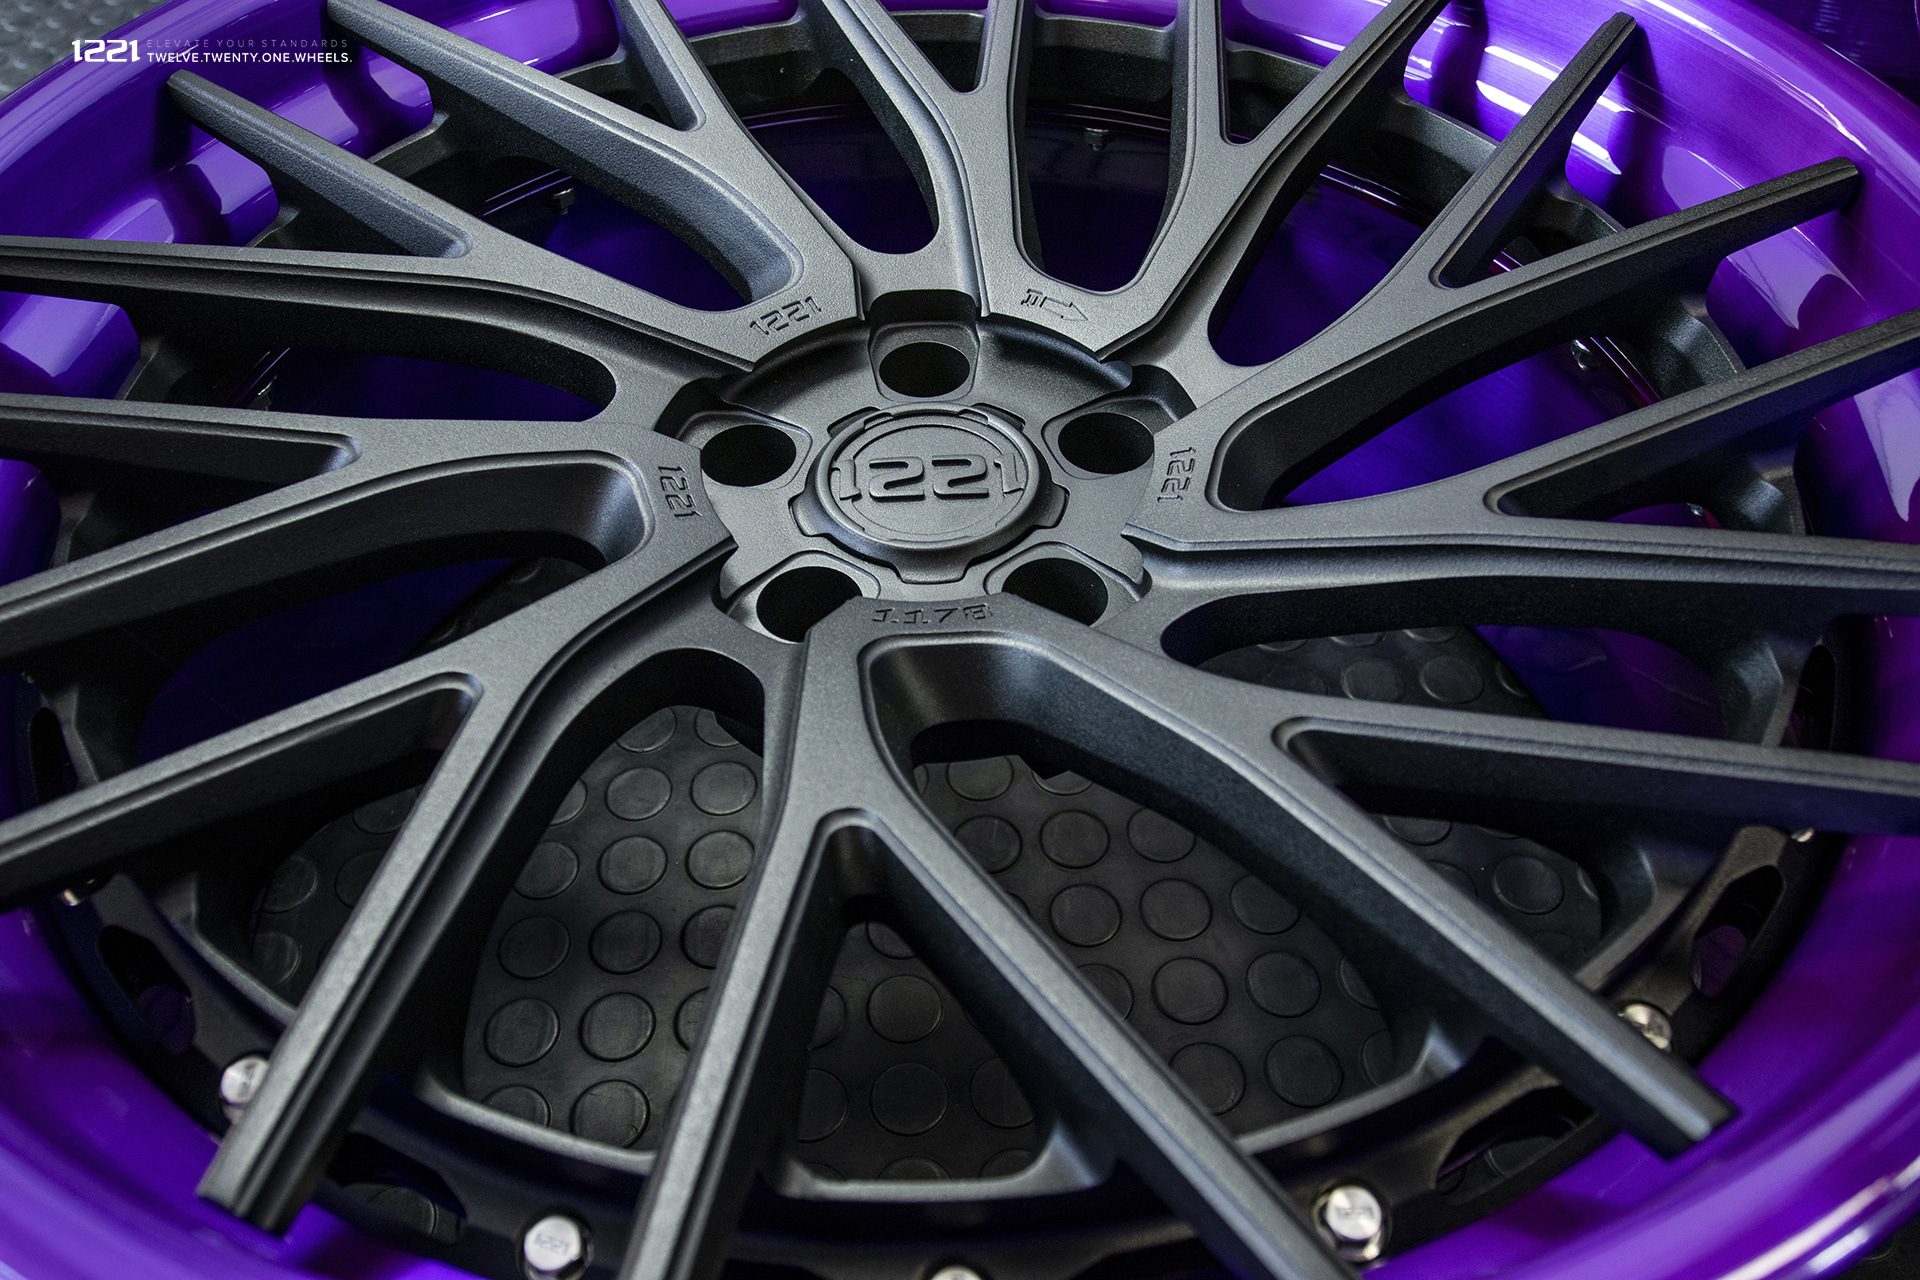 Rotational Concave Forged Wheels